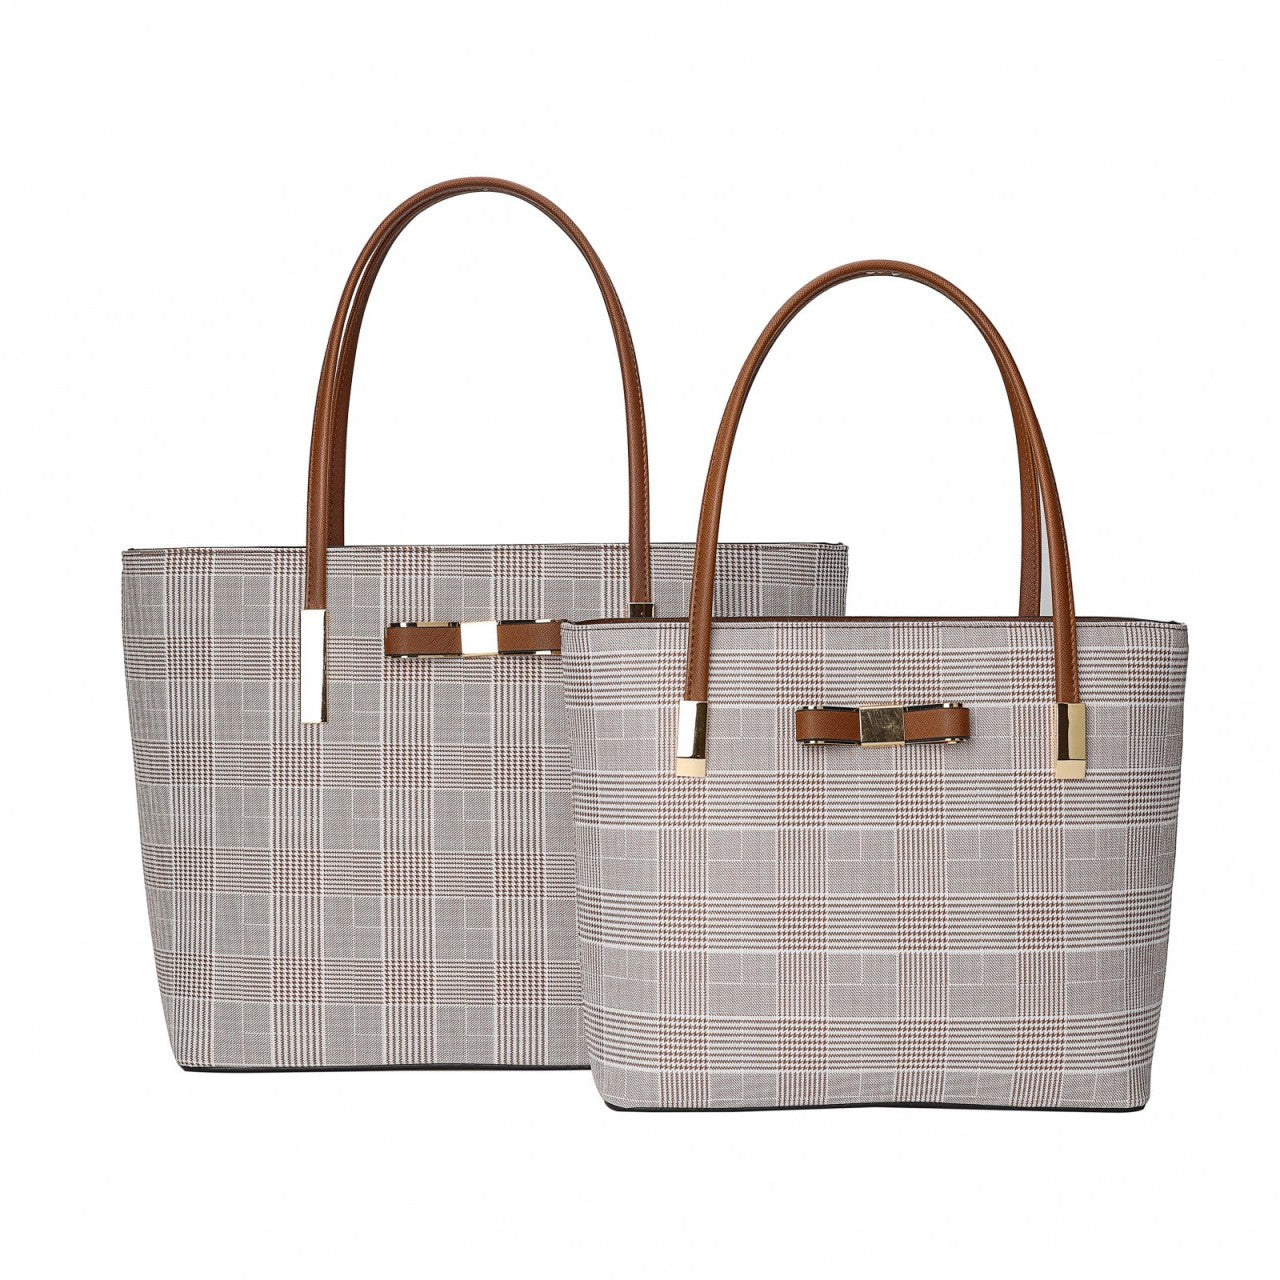 LYDC Bow Details Shoulder / Tote Handbags in CHECKERED pattern (Large & Medium Set)